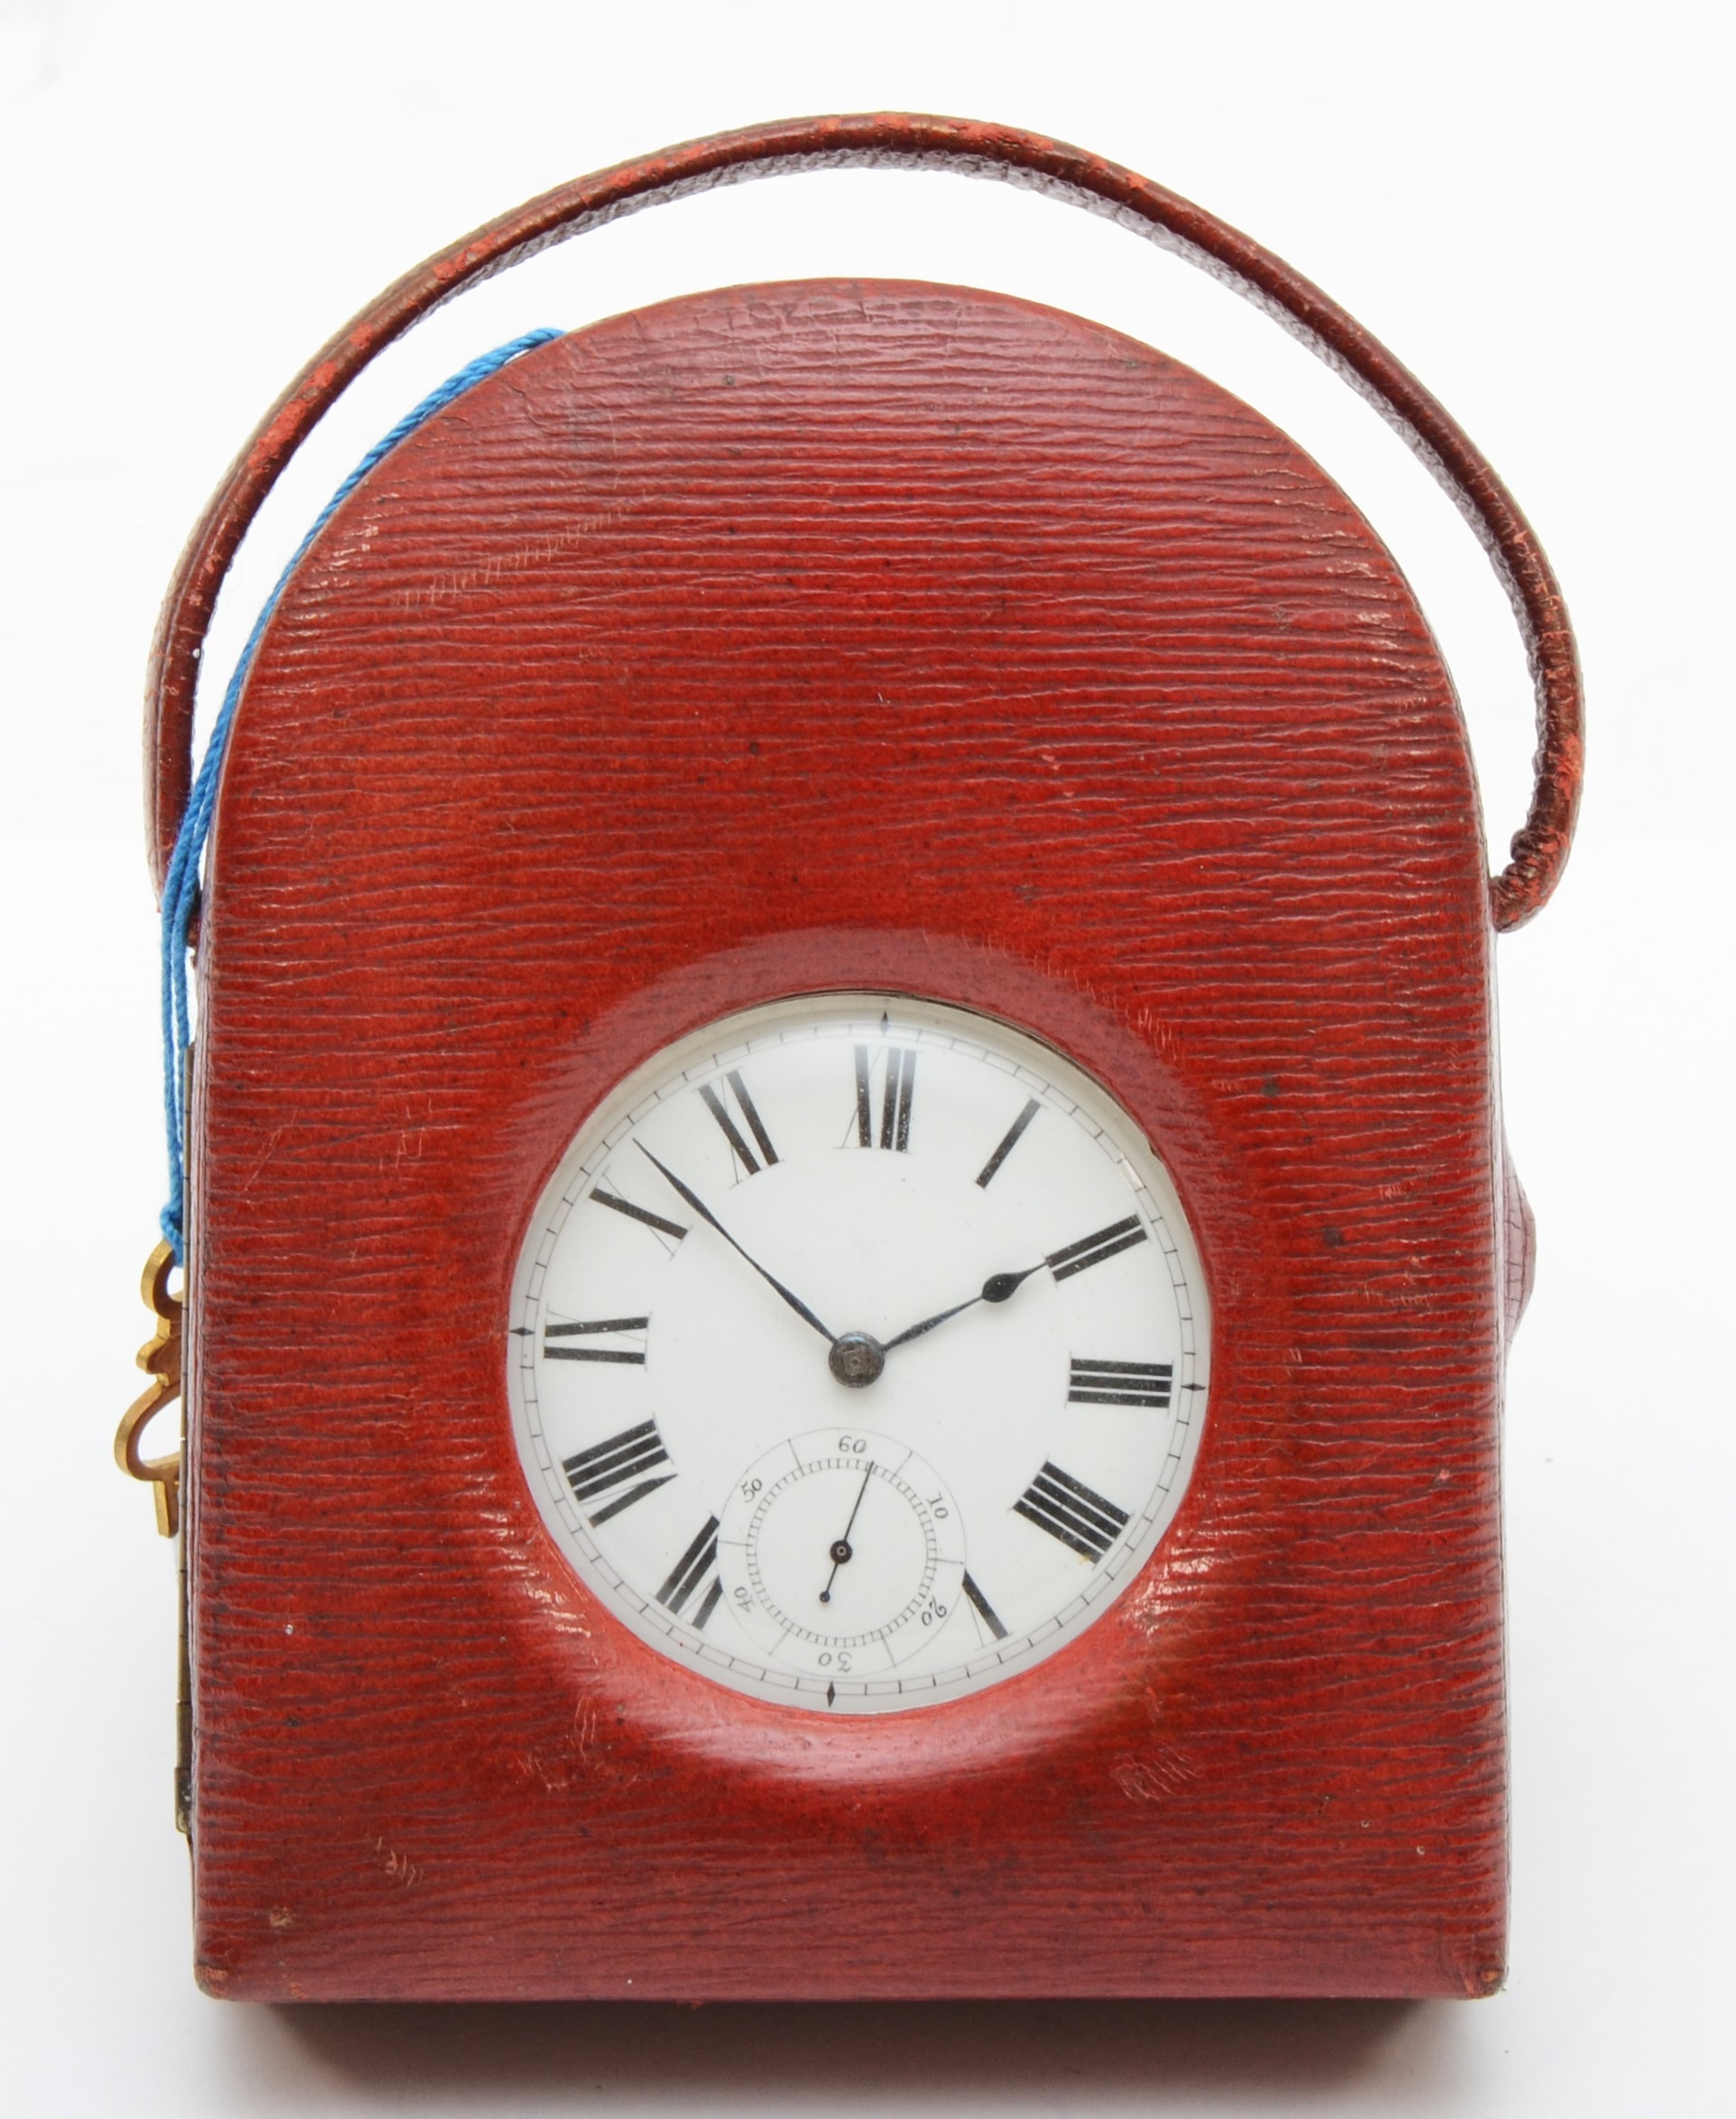 A silver Waltham key wound pocket watch, Birmingham 1883, diameter 5cm, with a red leather traveling